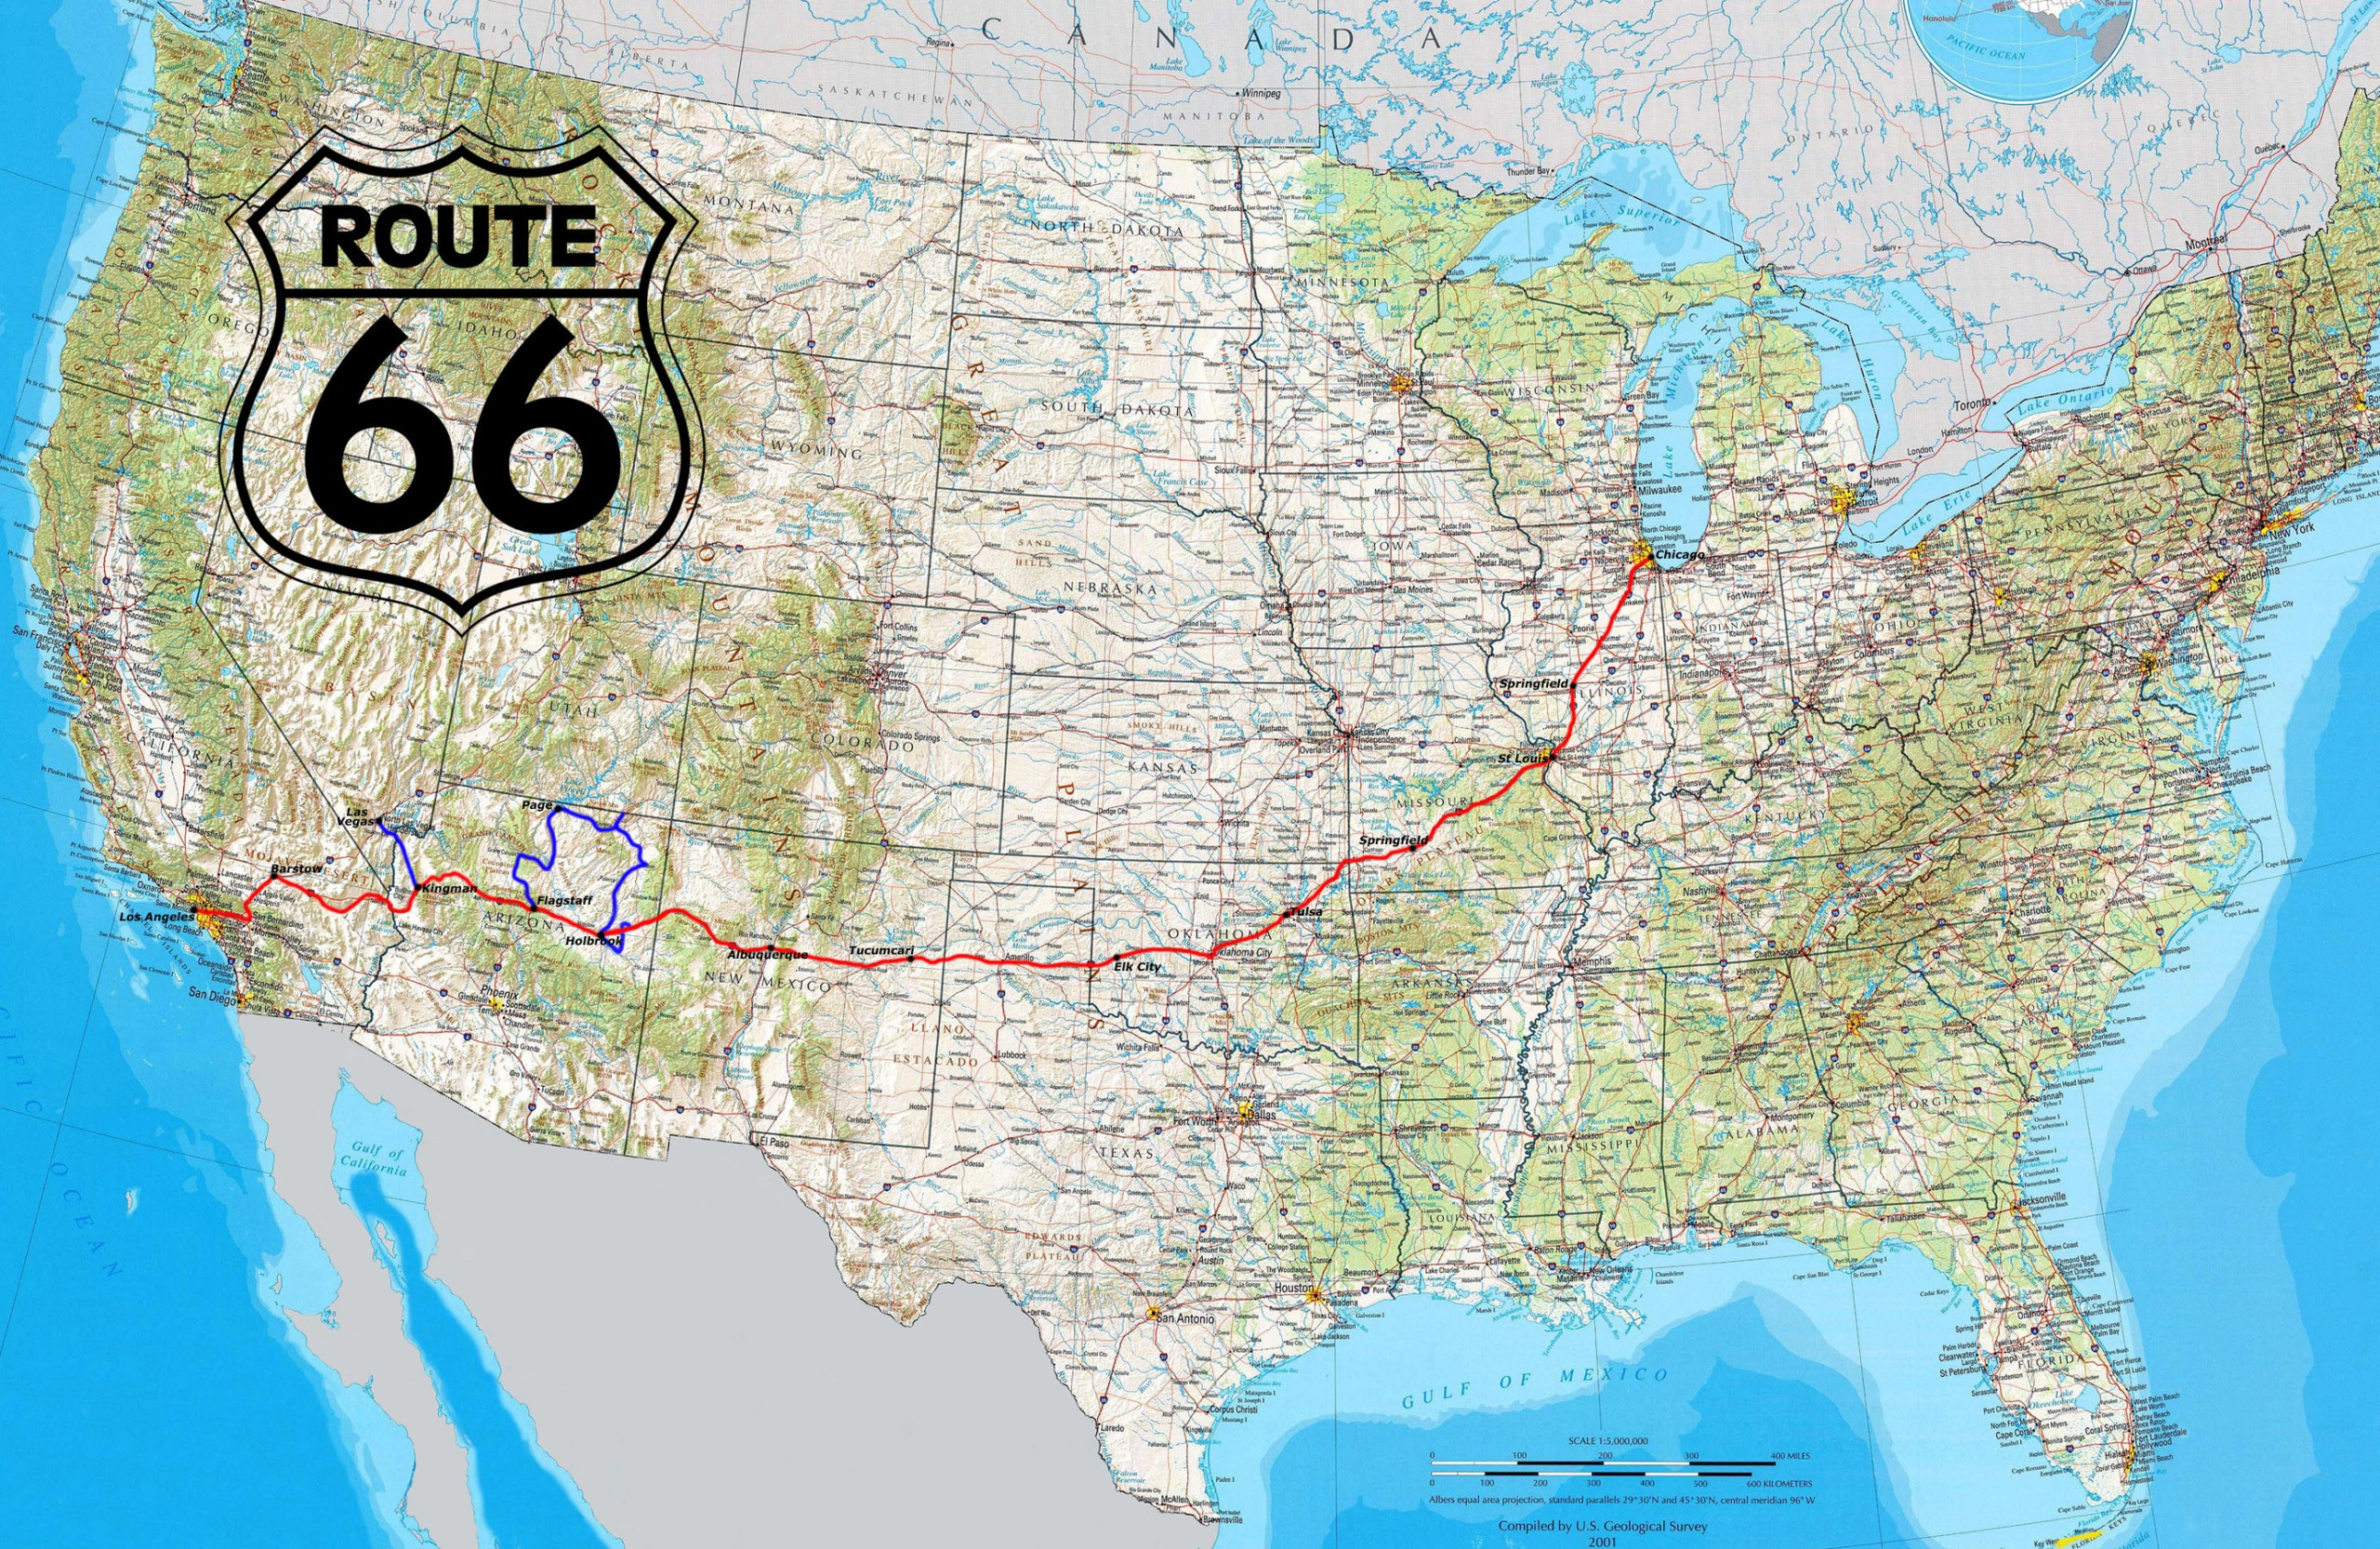 Road Route 66 USA Highway Map North America Canada 